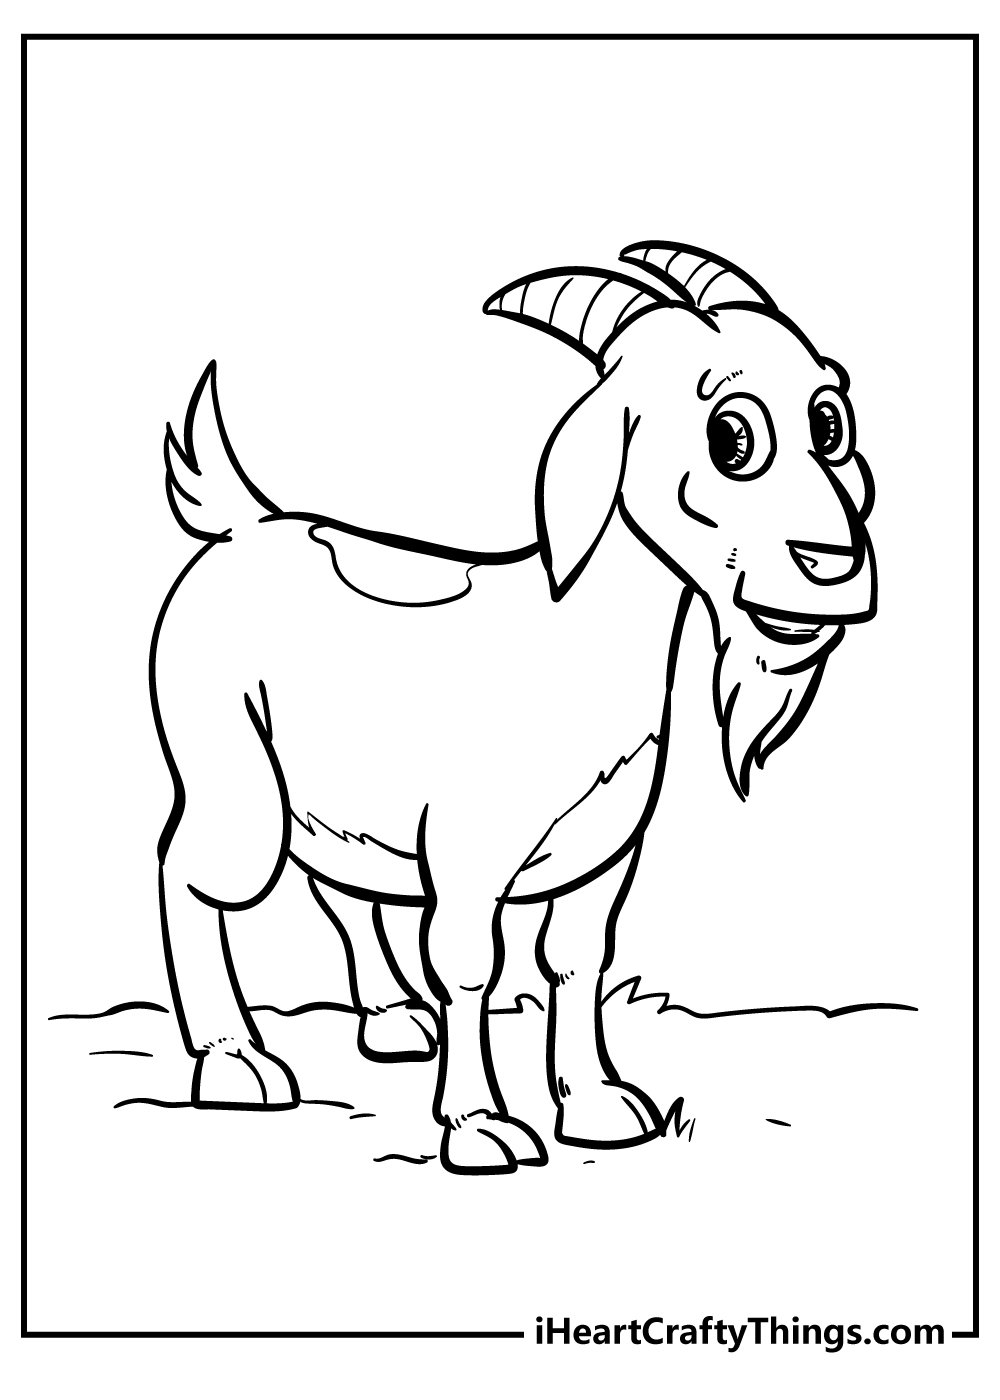 Goat Coloring Sheet for children free download